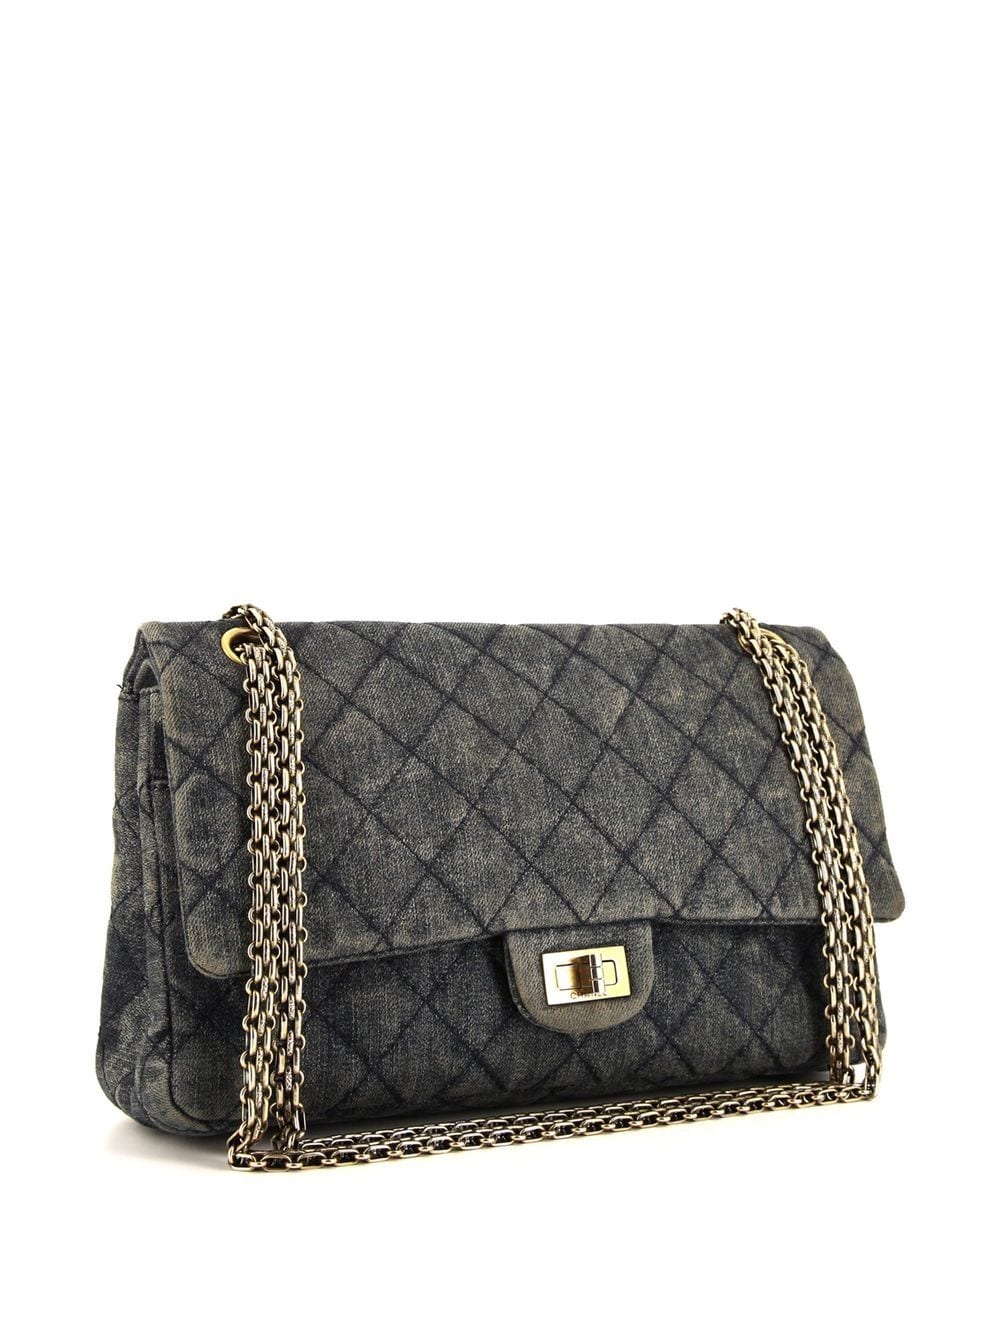 CHANEL Pre-Owned 2012 2.55 Classic Flap Shoulder Bag - Farfetch